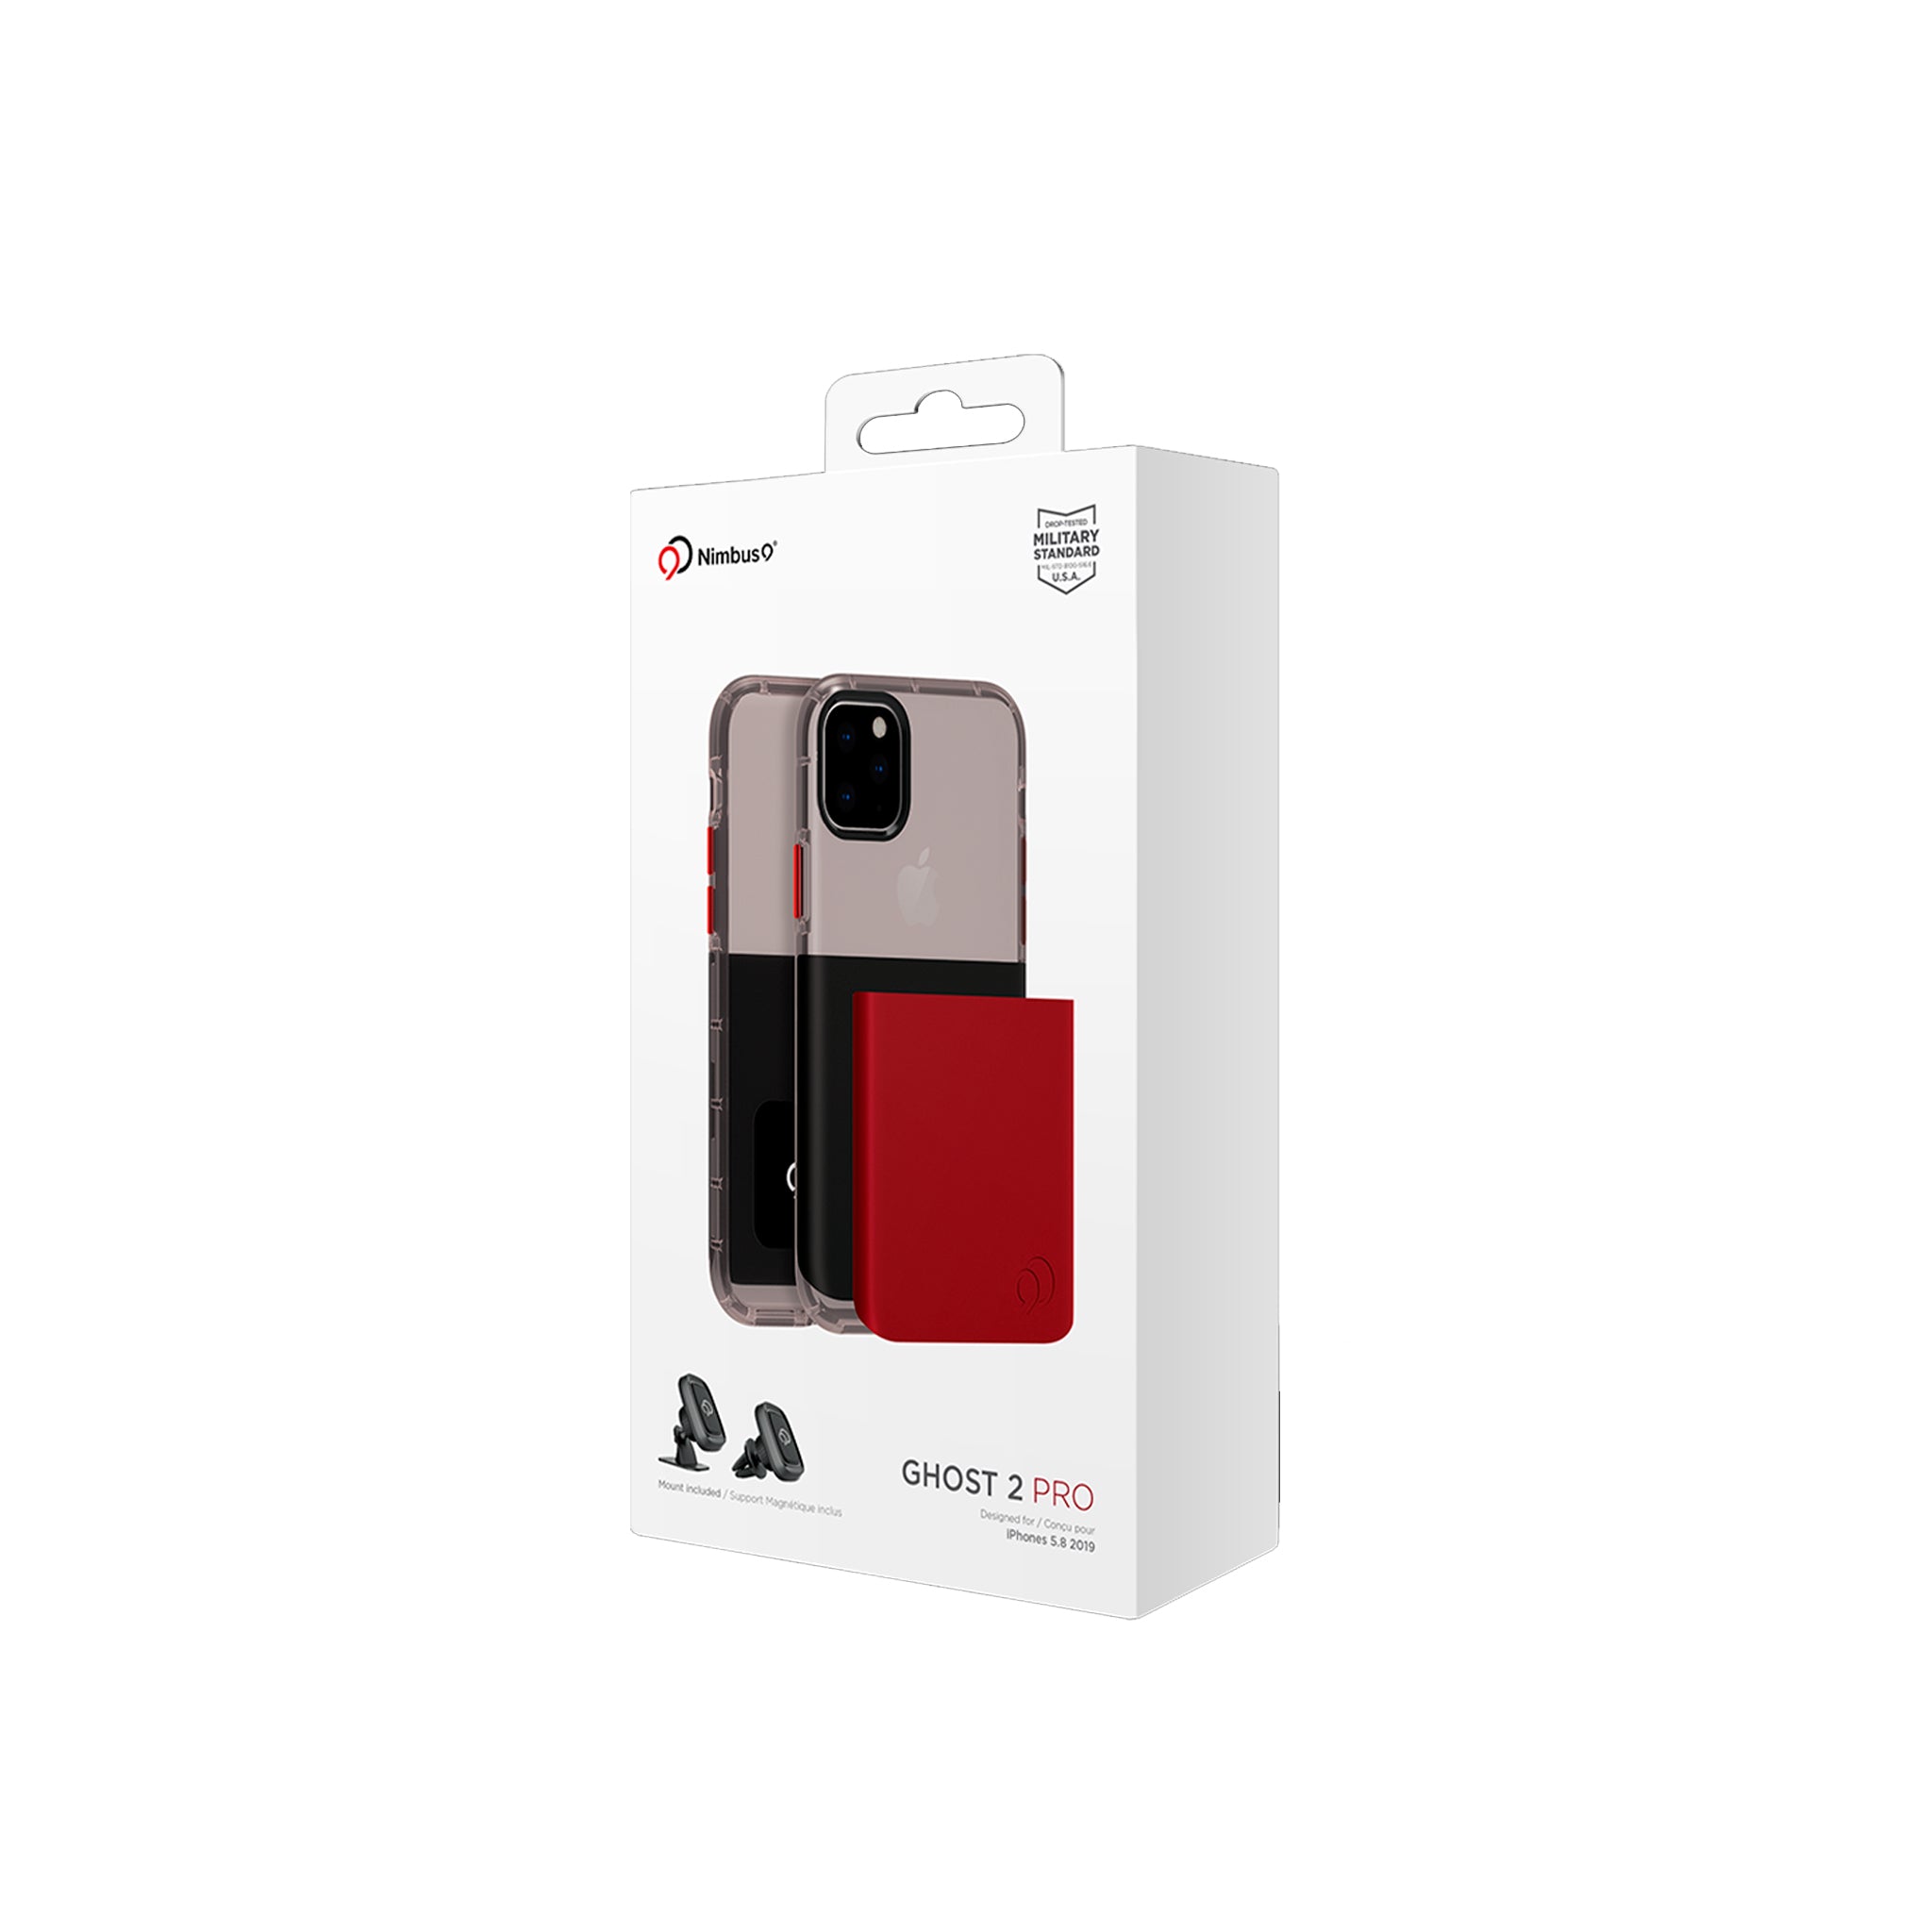 Nimbus9 - Ghost 2 Pro Case With Mount For Apple Iphone 11 Pro / Xs / X - Pitch Black And Crimson